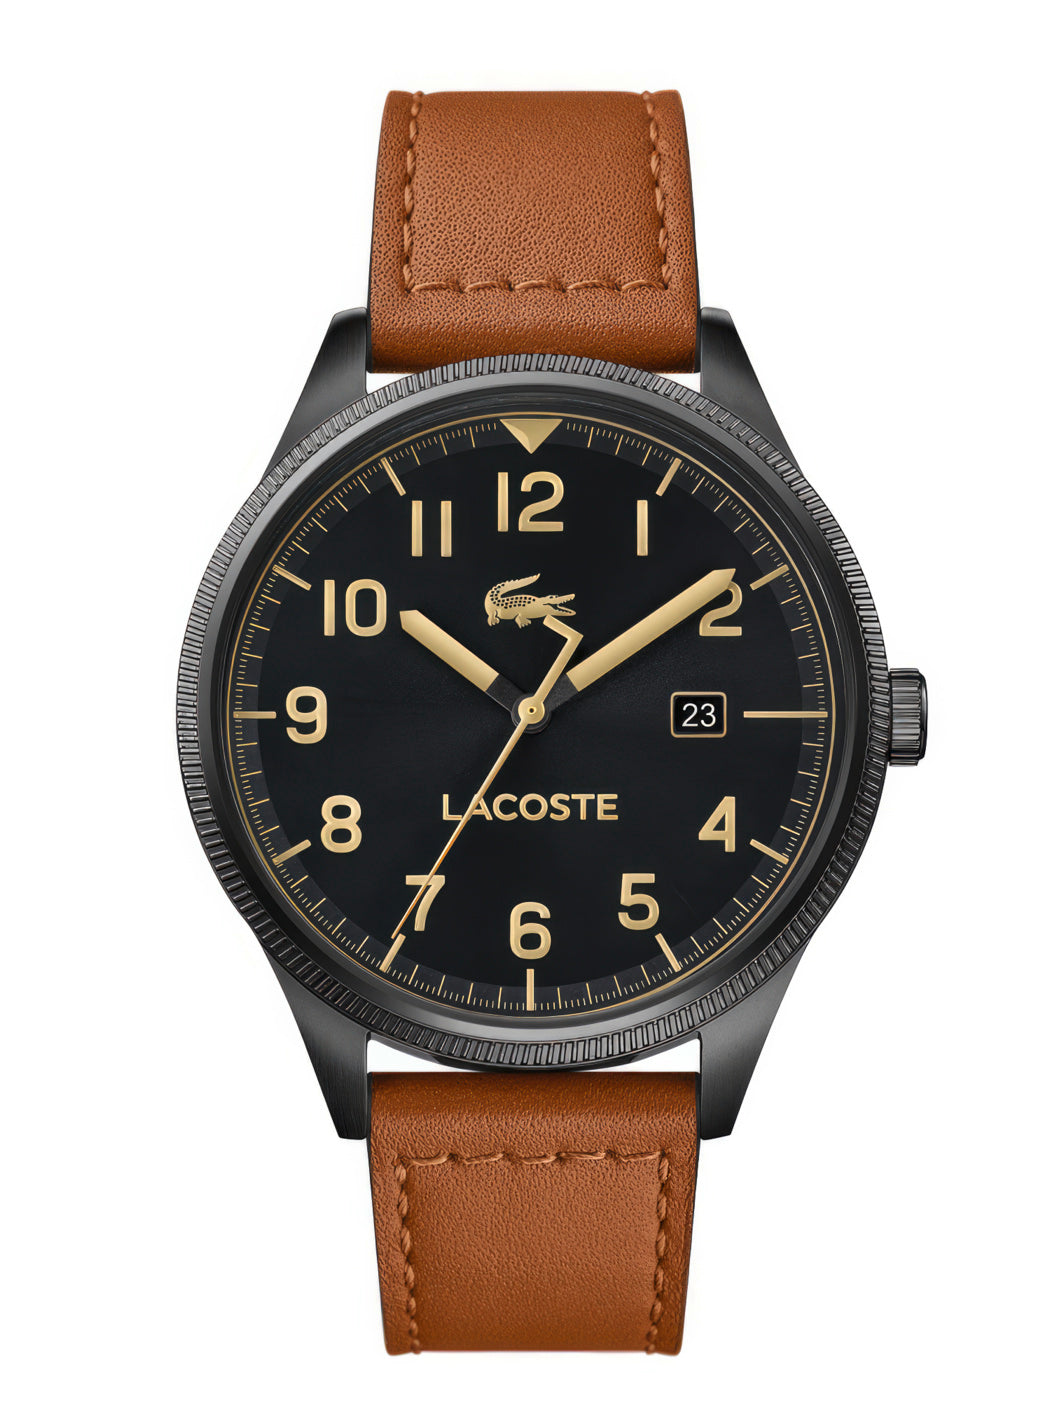 The Men's Lacoste Men's Continental Date Black Watch 2011021 with a brown leather strap combines vintage aviation style with water resistance.